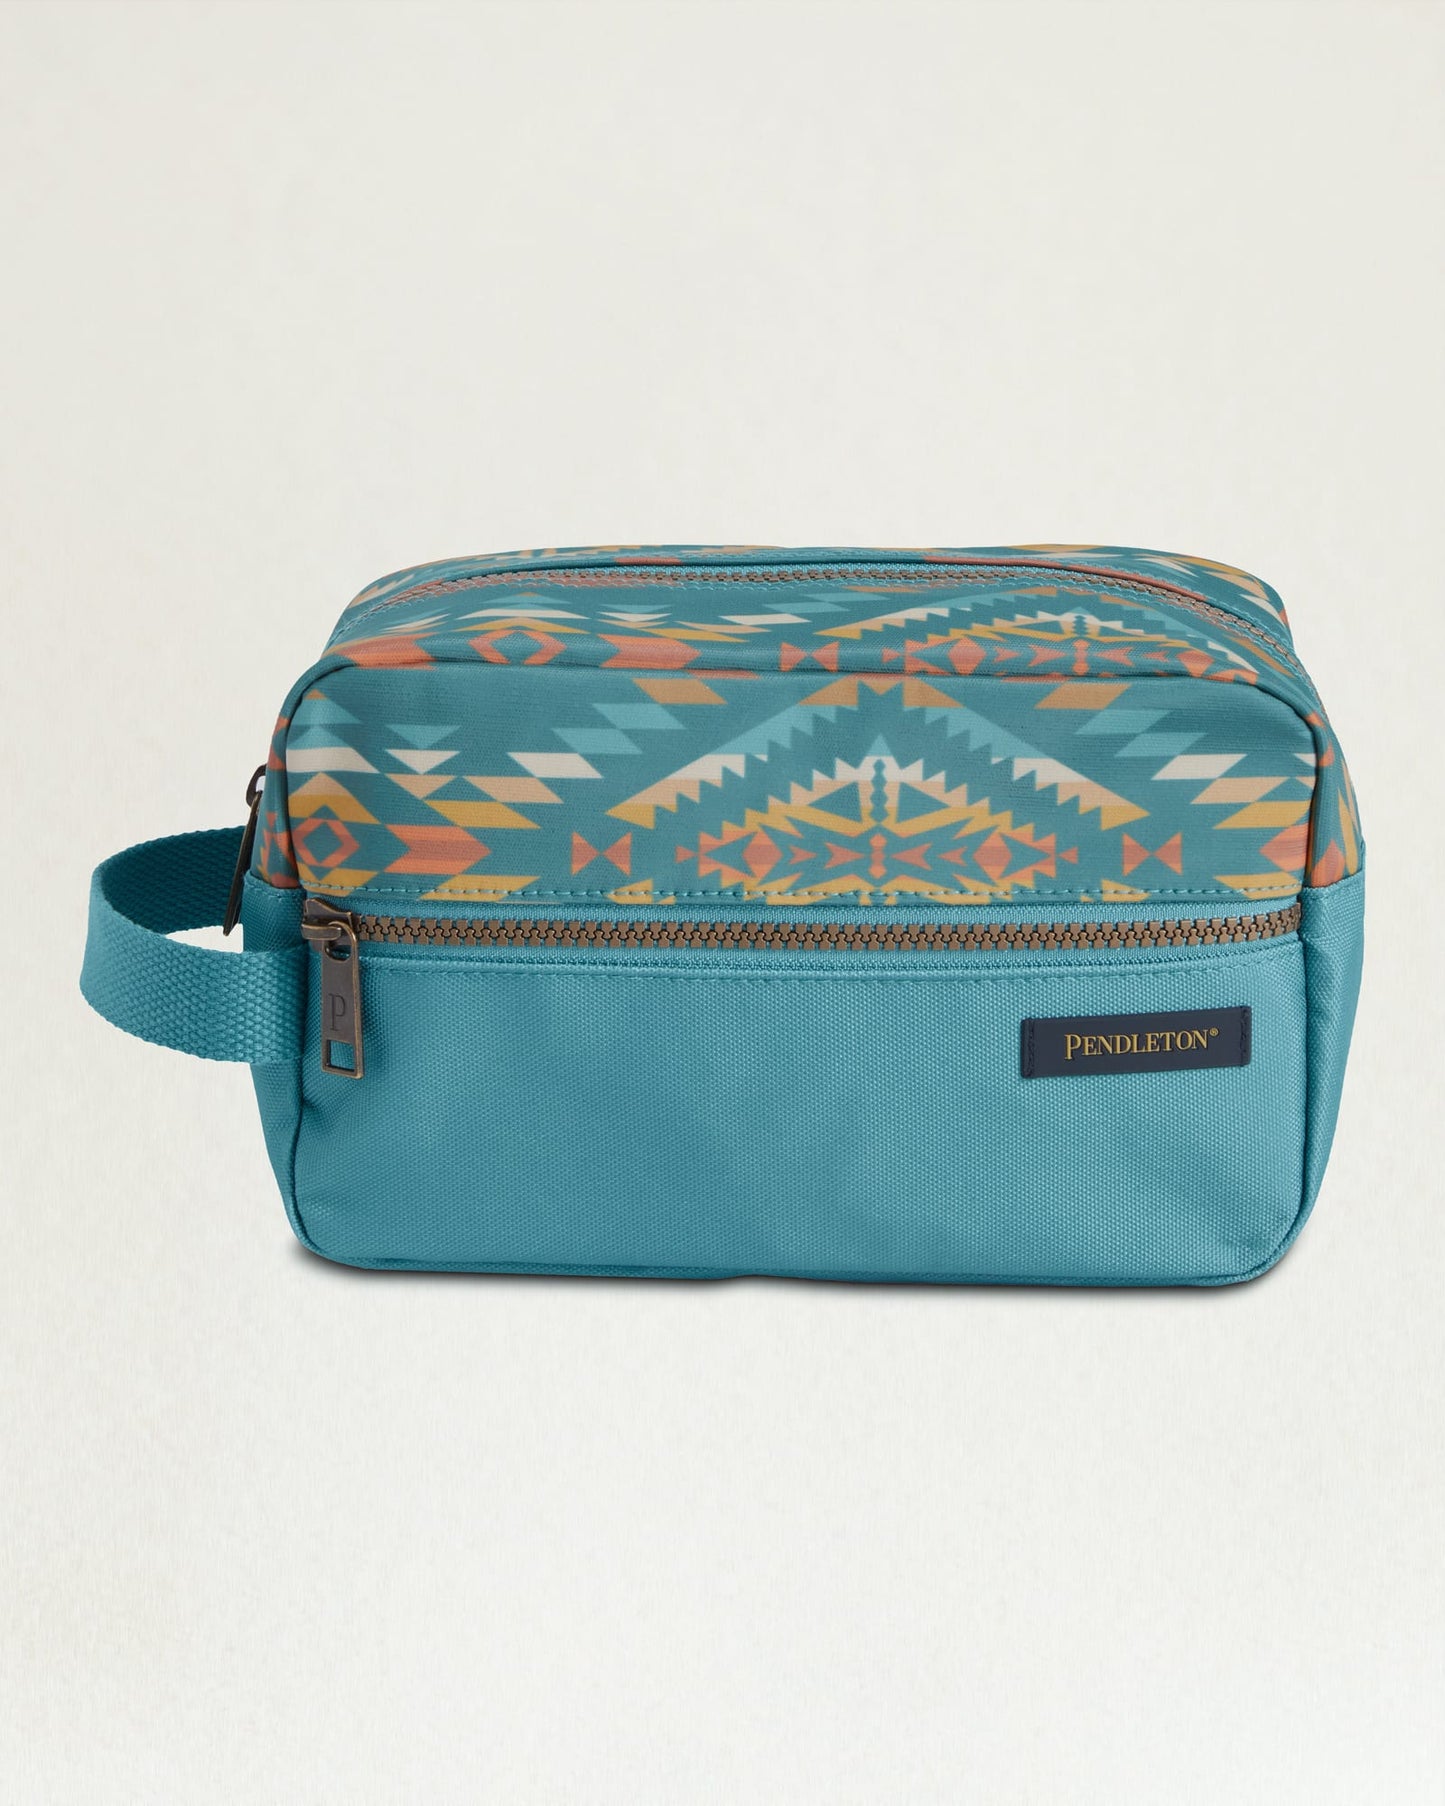 Pendleton Summerland Bright Canopy Canvas Carryall Pouch